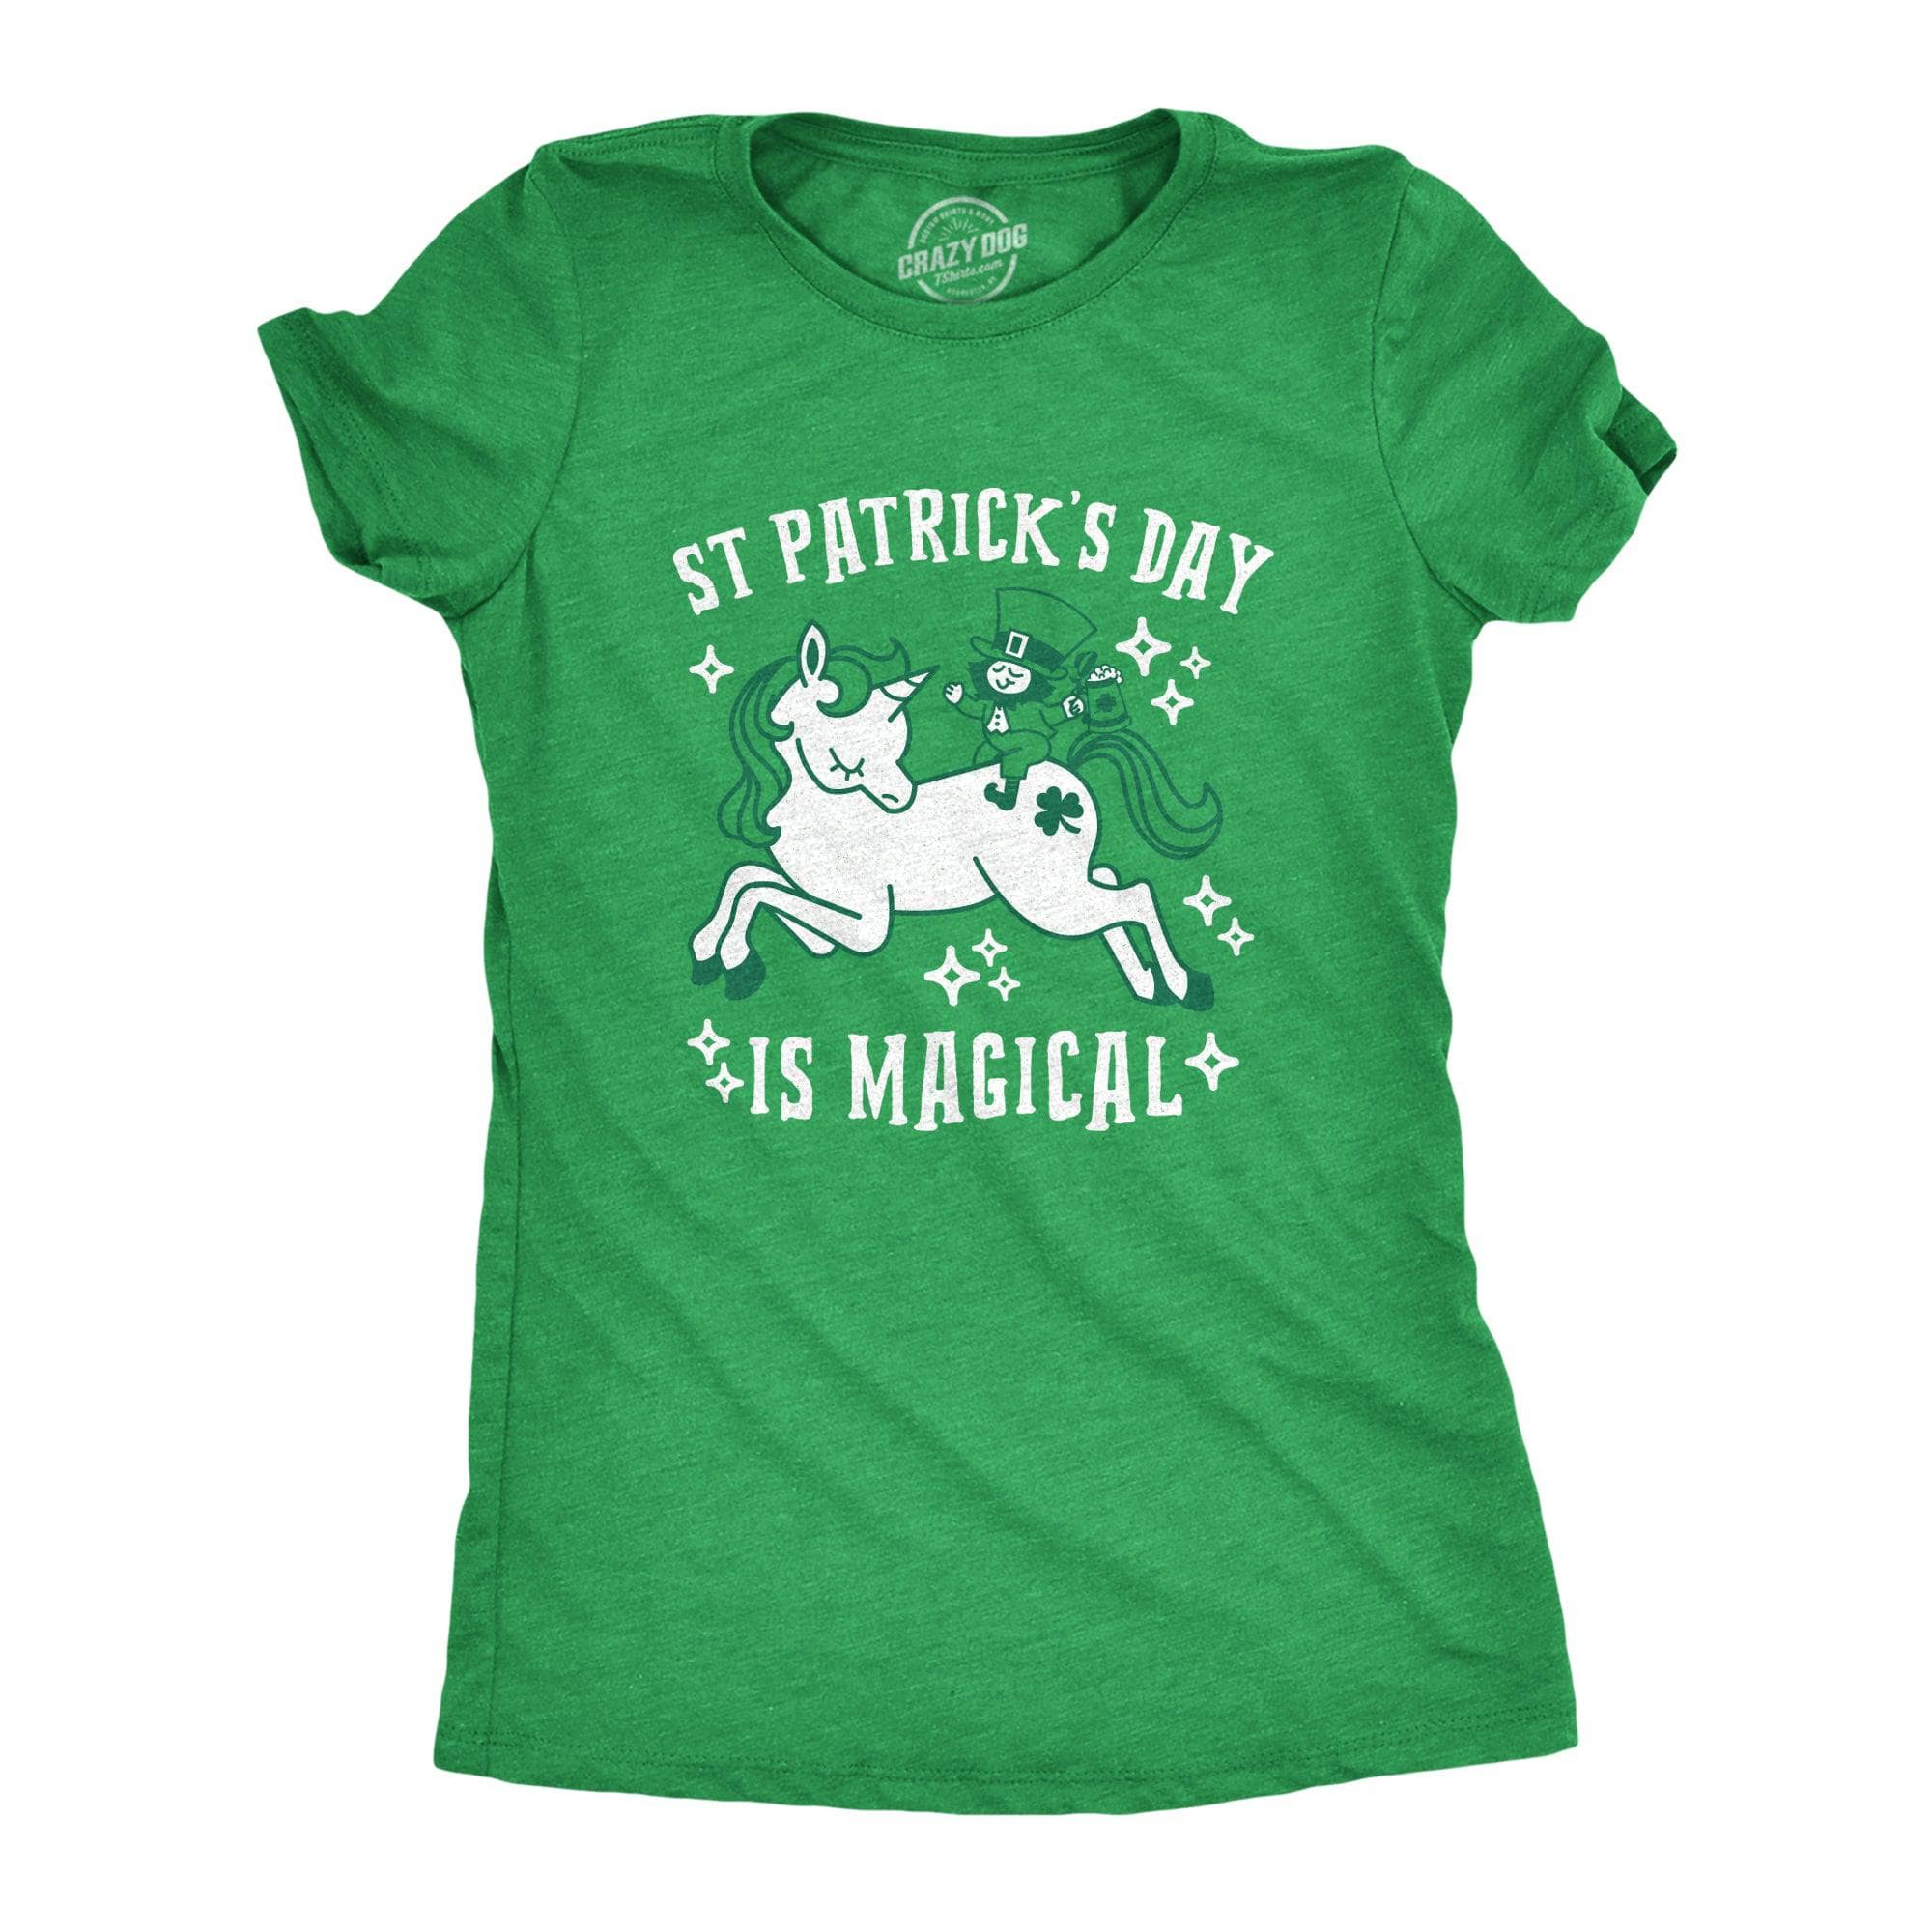 St. Patrick's Day Is Magical Women's Tshirt  -  Crazy Dog T-Shirts